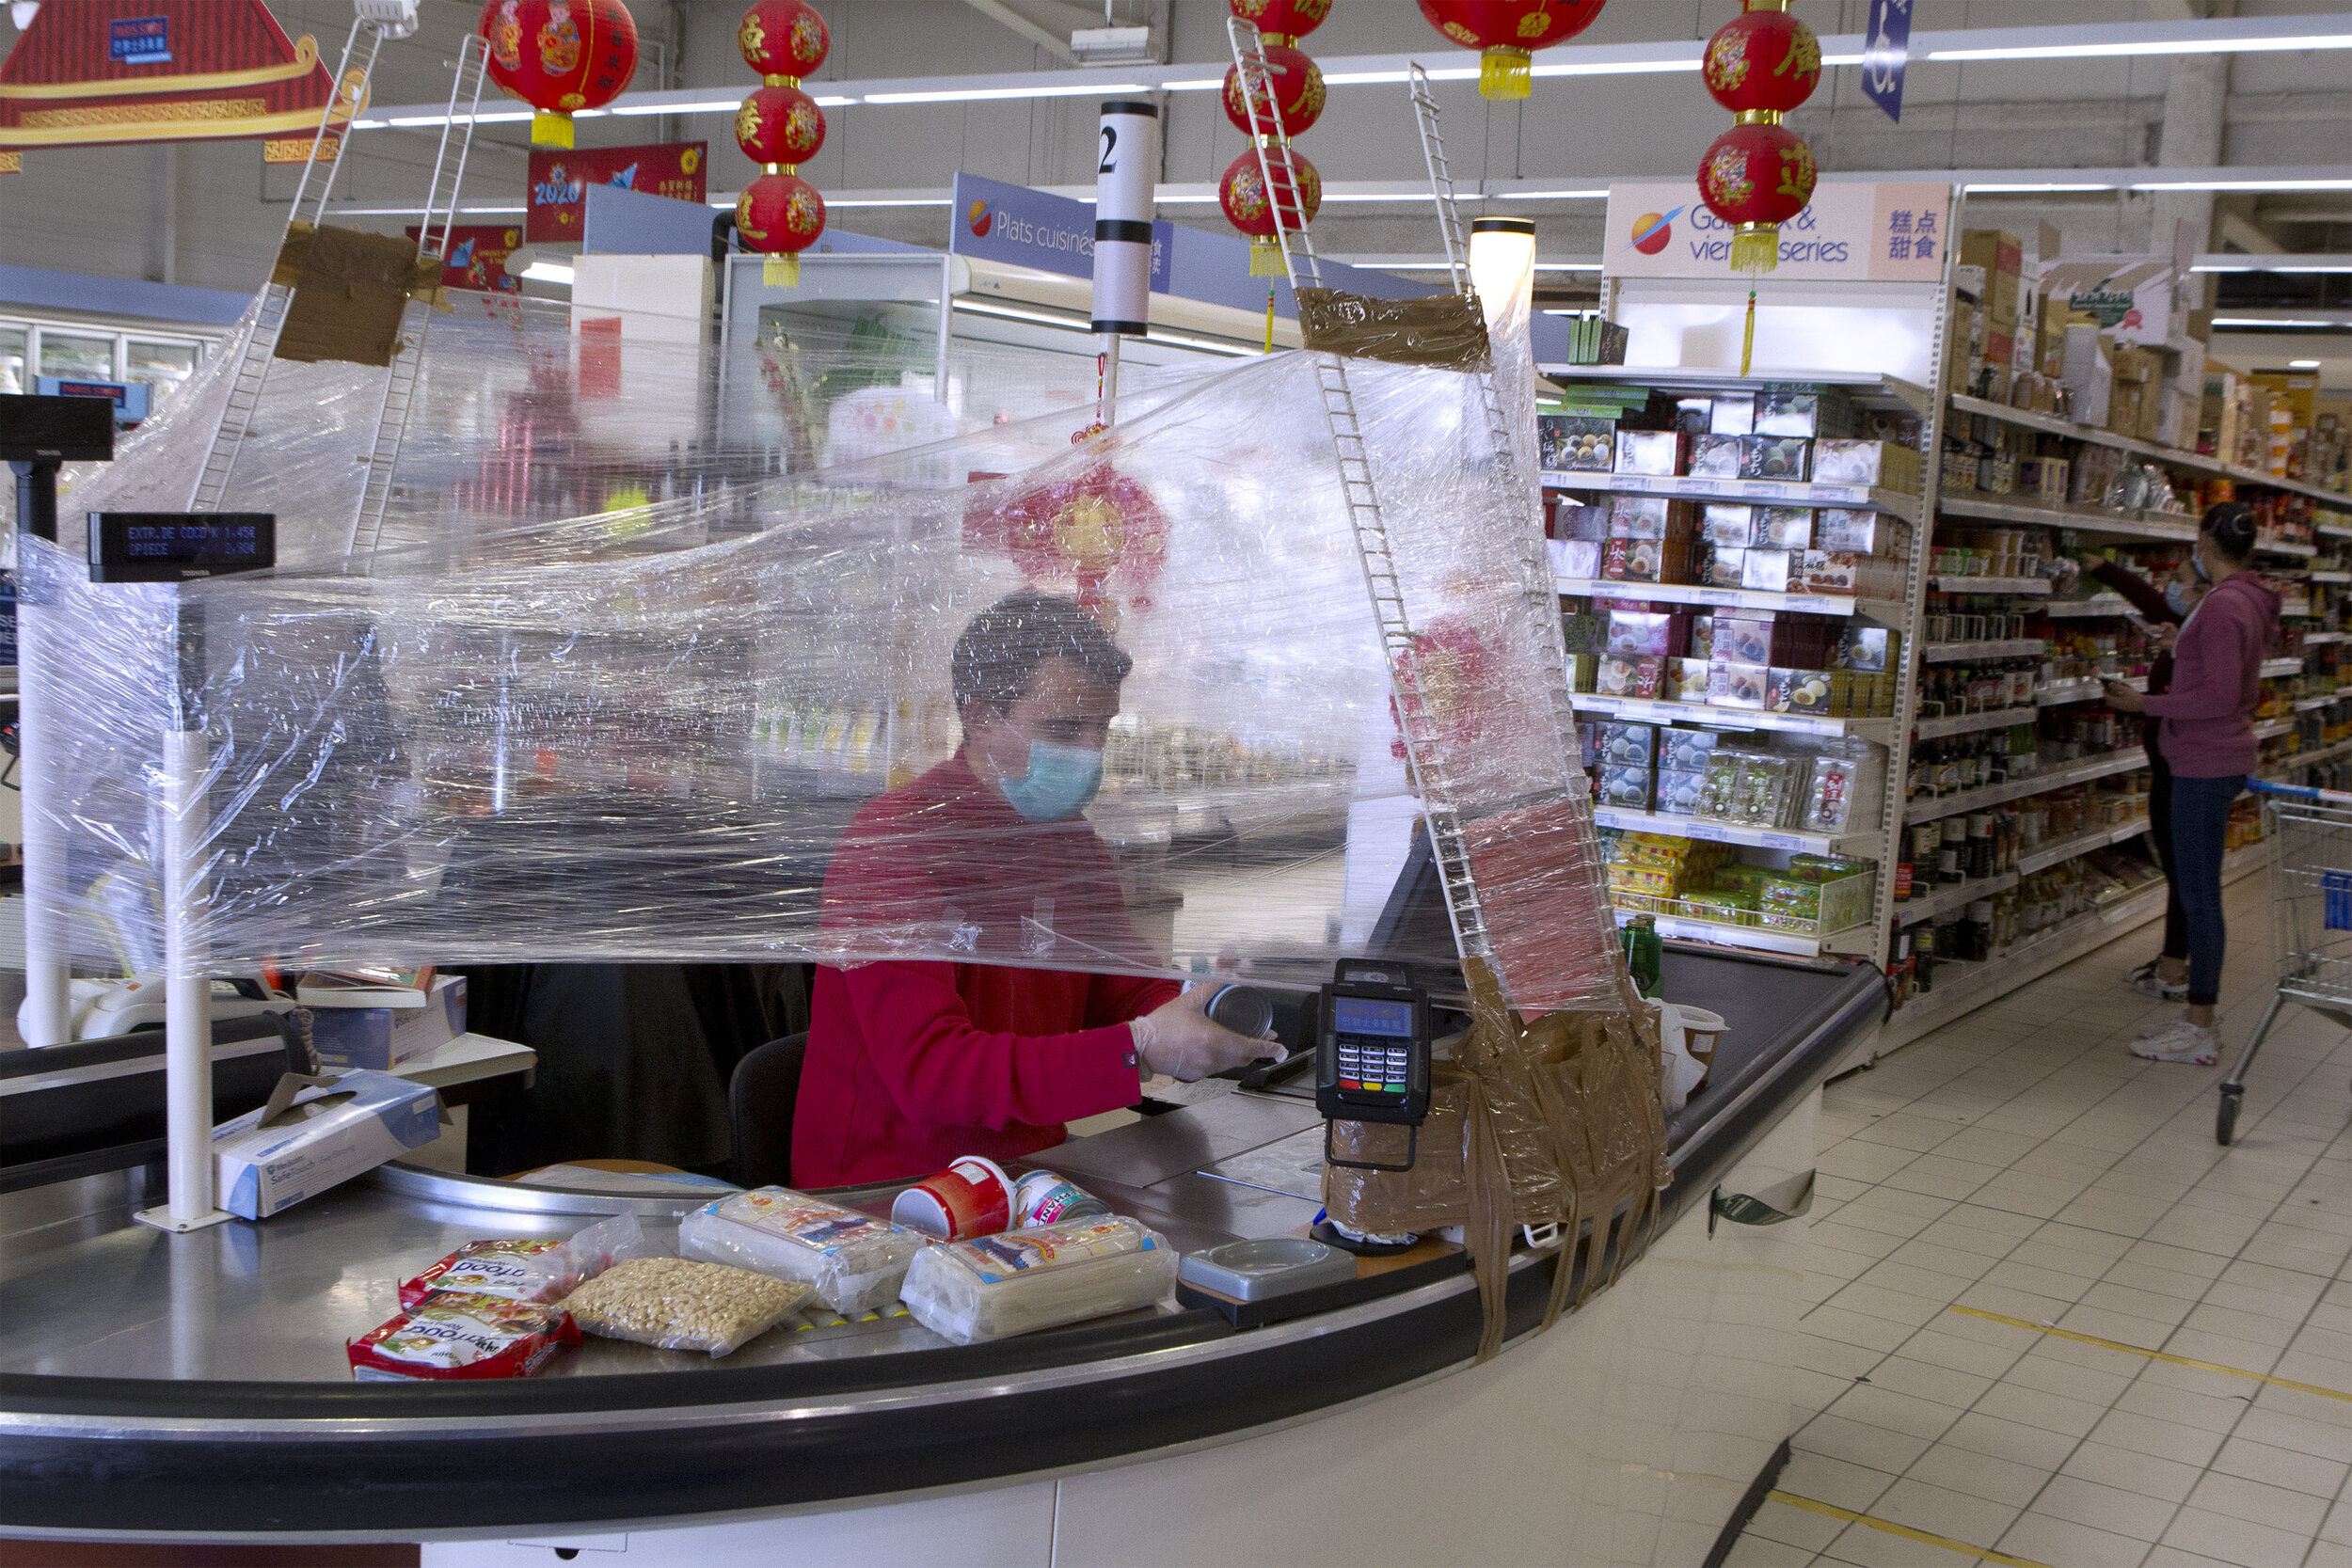   © Guillaume Bonnefont / IP3, Montpellier, France April 7, 2020 - A cashier is protected by plastic film to avoid contamination with customers during the coronavirus epidemic.  